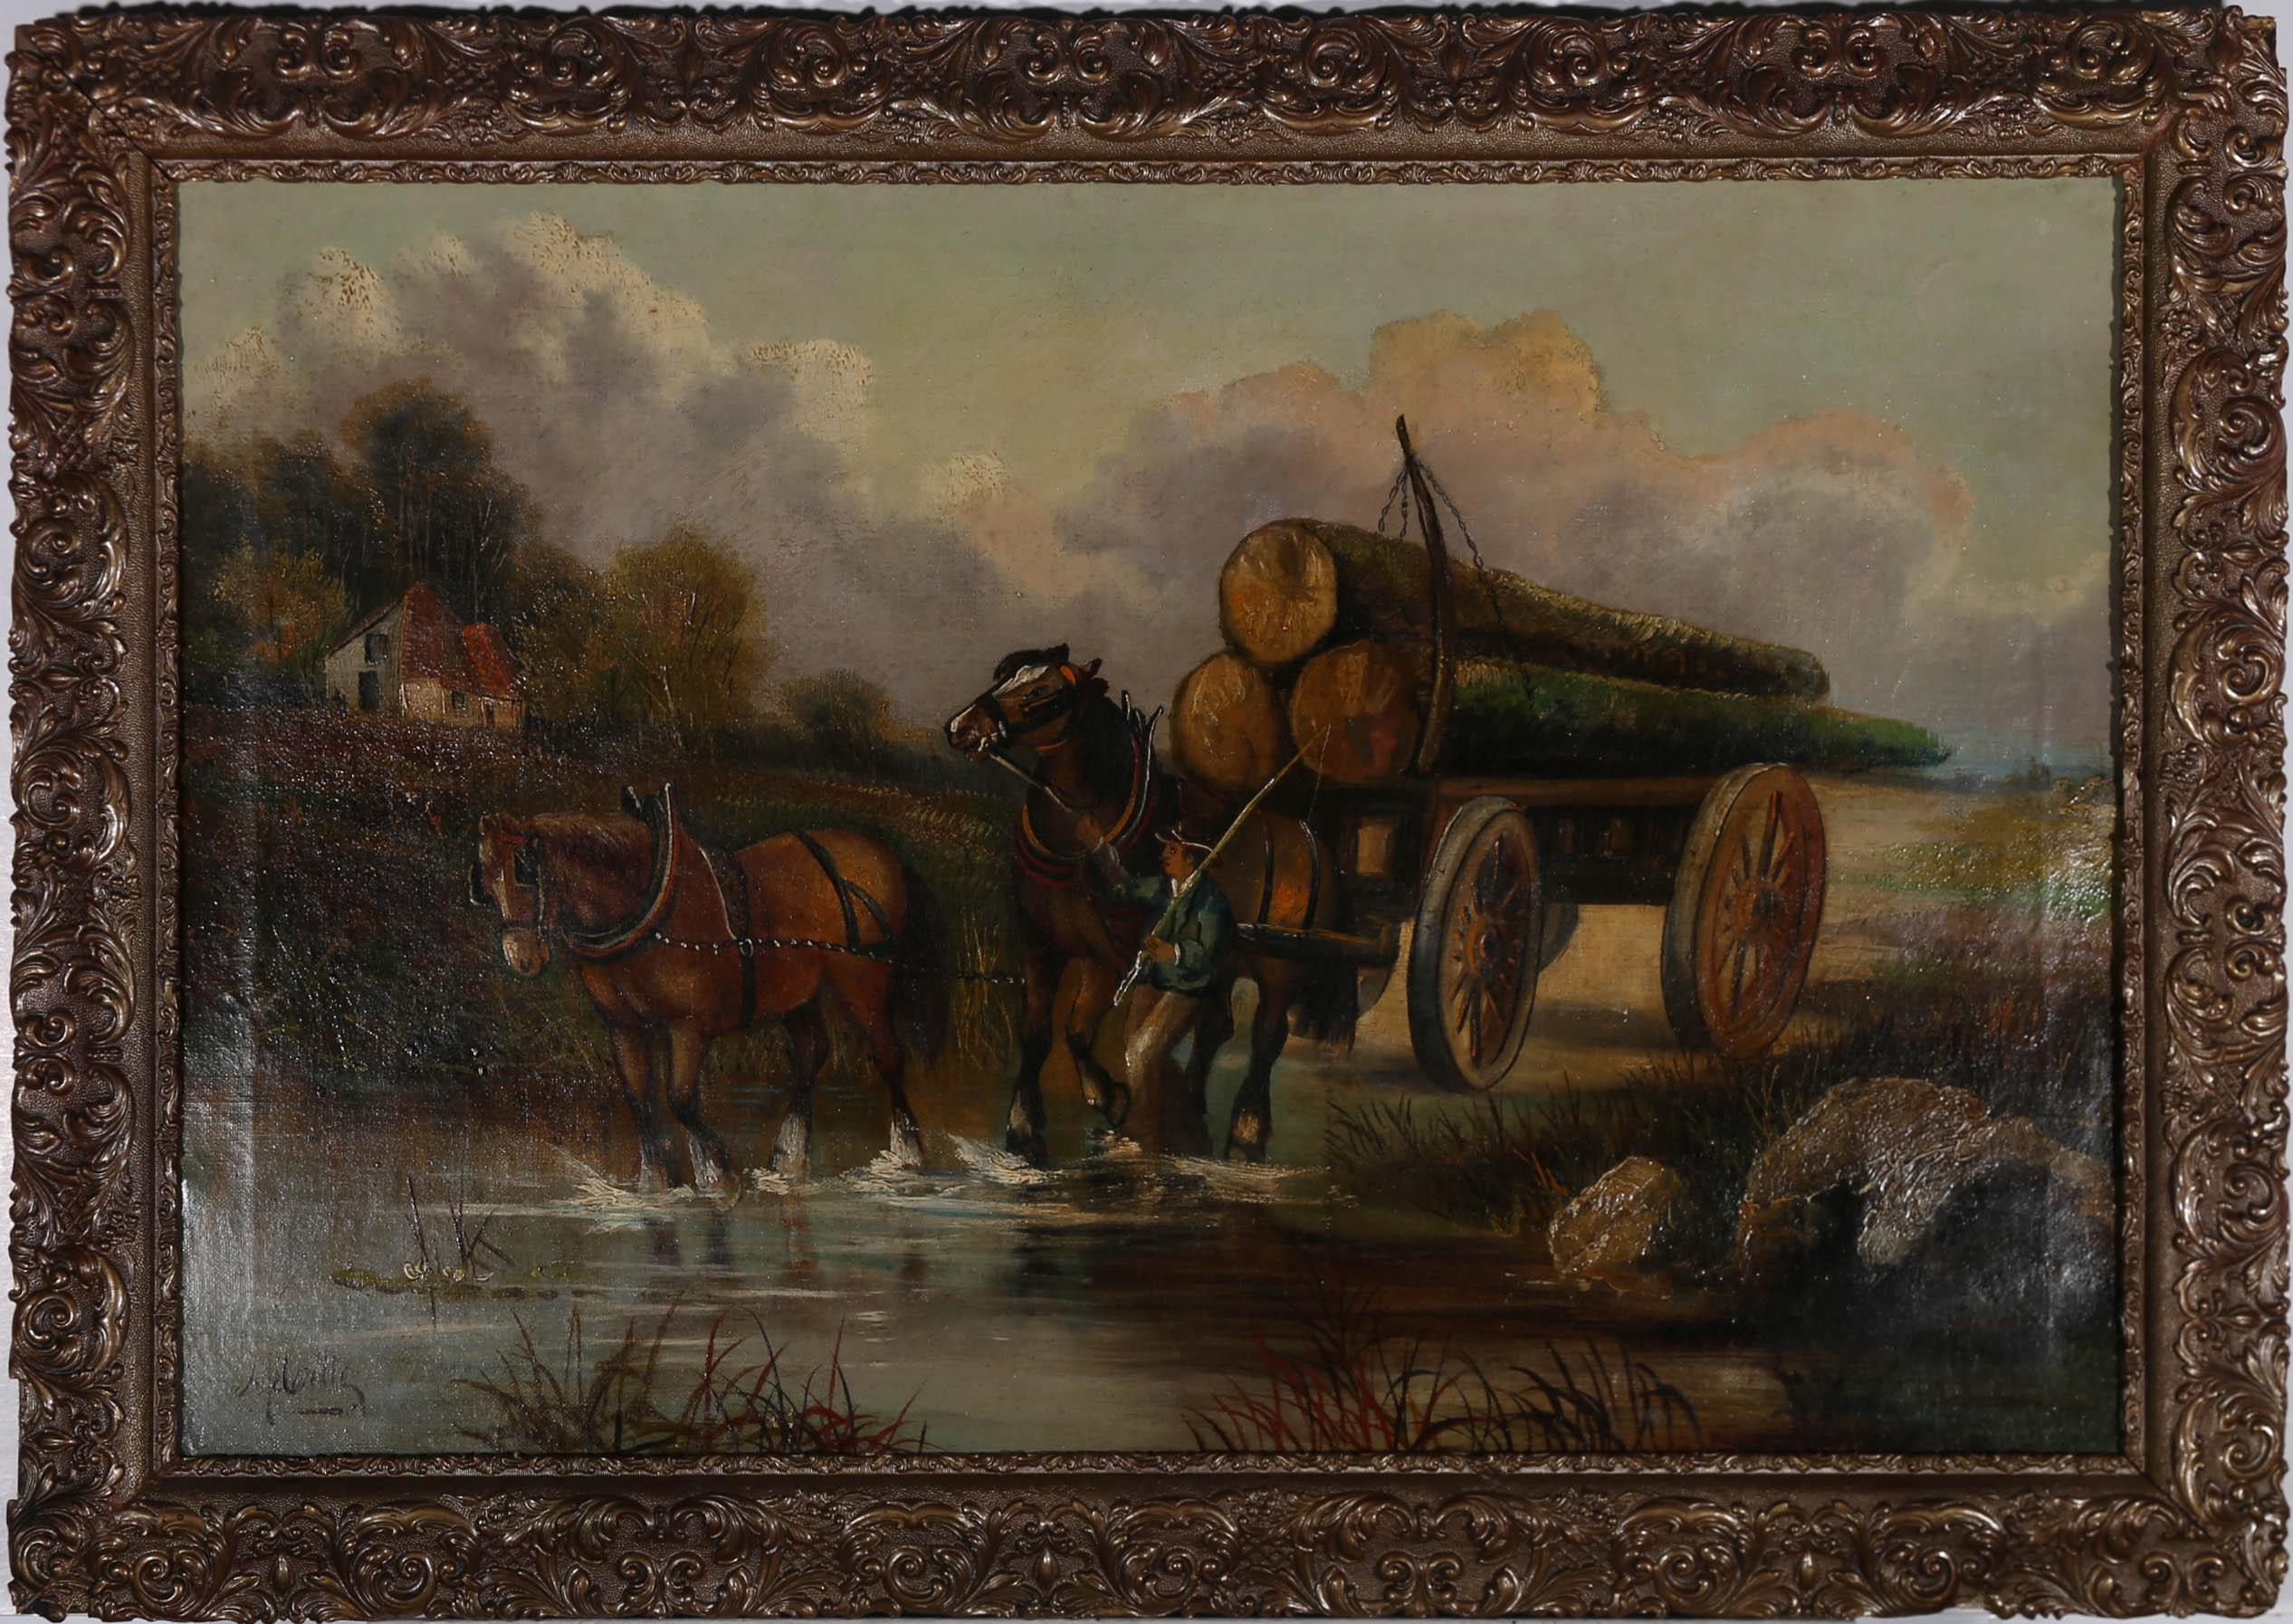 This charming scene depicts two shire horse hauling timer across a shallow creek. A man guides the heavy set horses into the water, gently encouraging them with the reins. The artist captures charming details within the scene such as the small